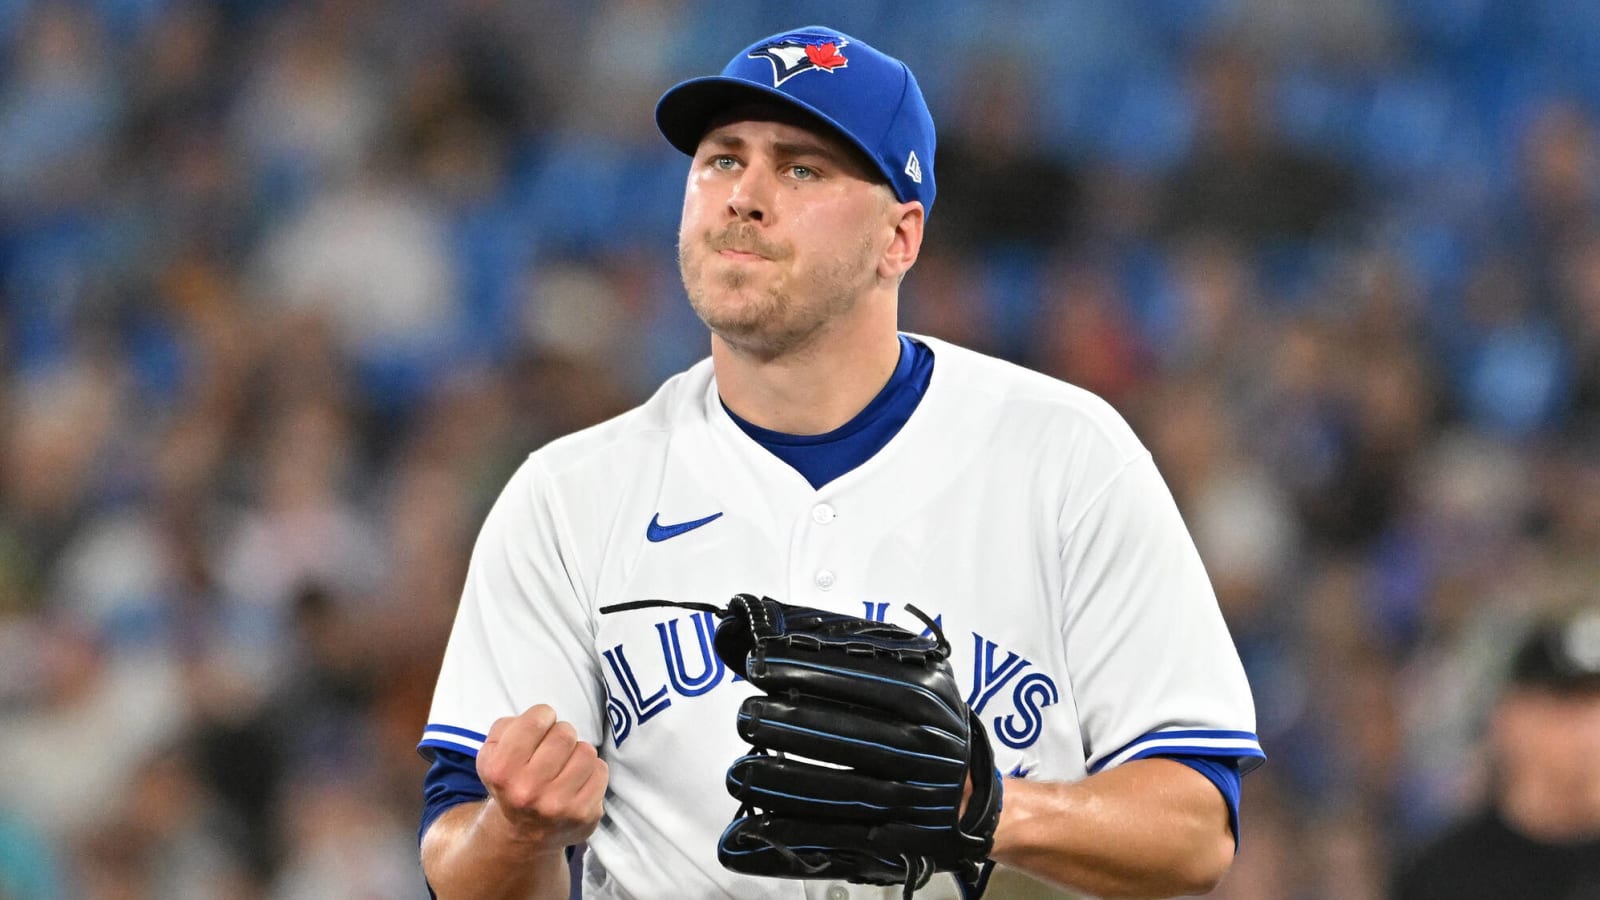 Toby Swanson, four-year-old son of Blue Jays reliever Erik Swanson, in critical condition after being struck by car